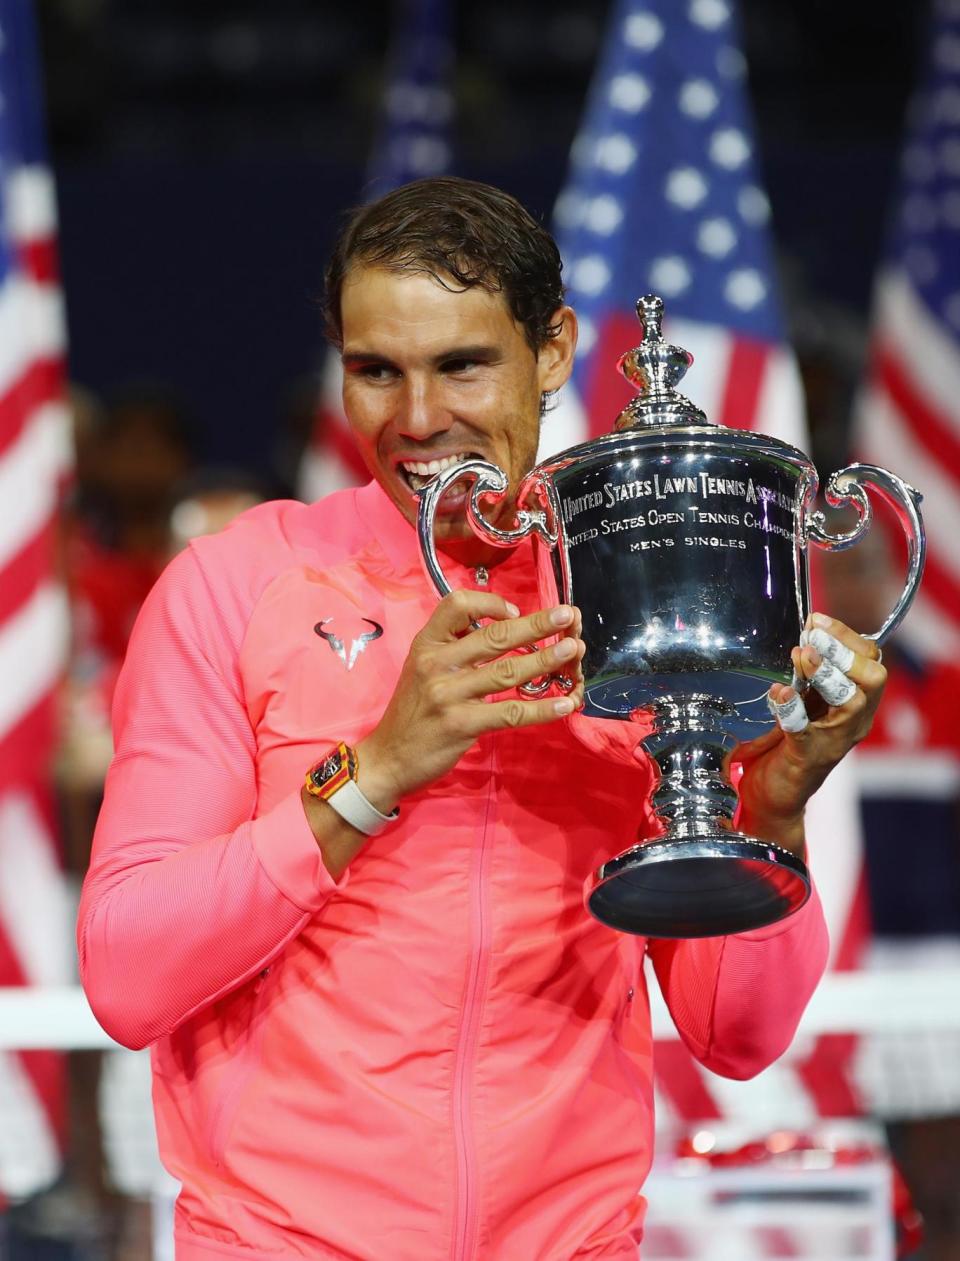 Nadal was in superb form on the final day of the US Open (Getty)